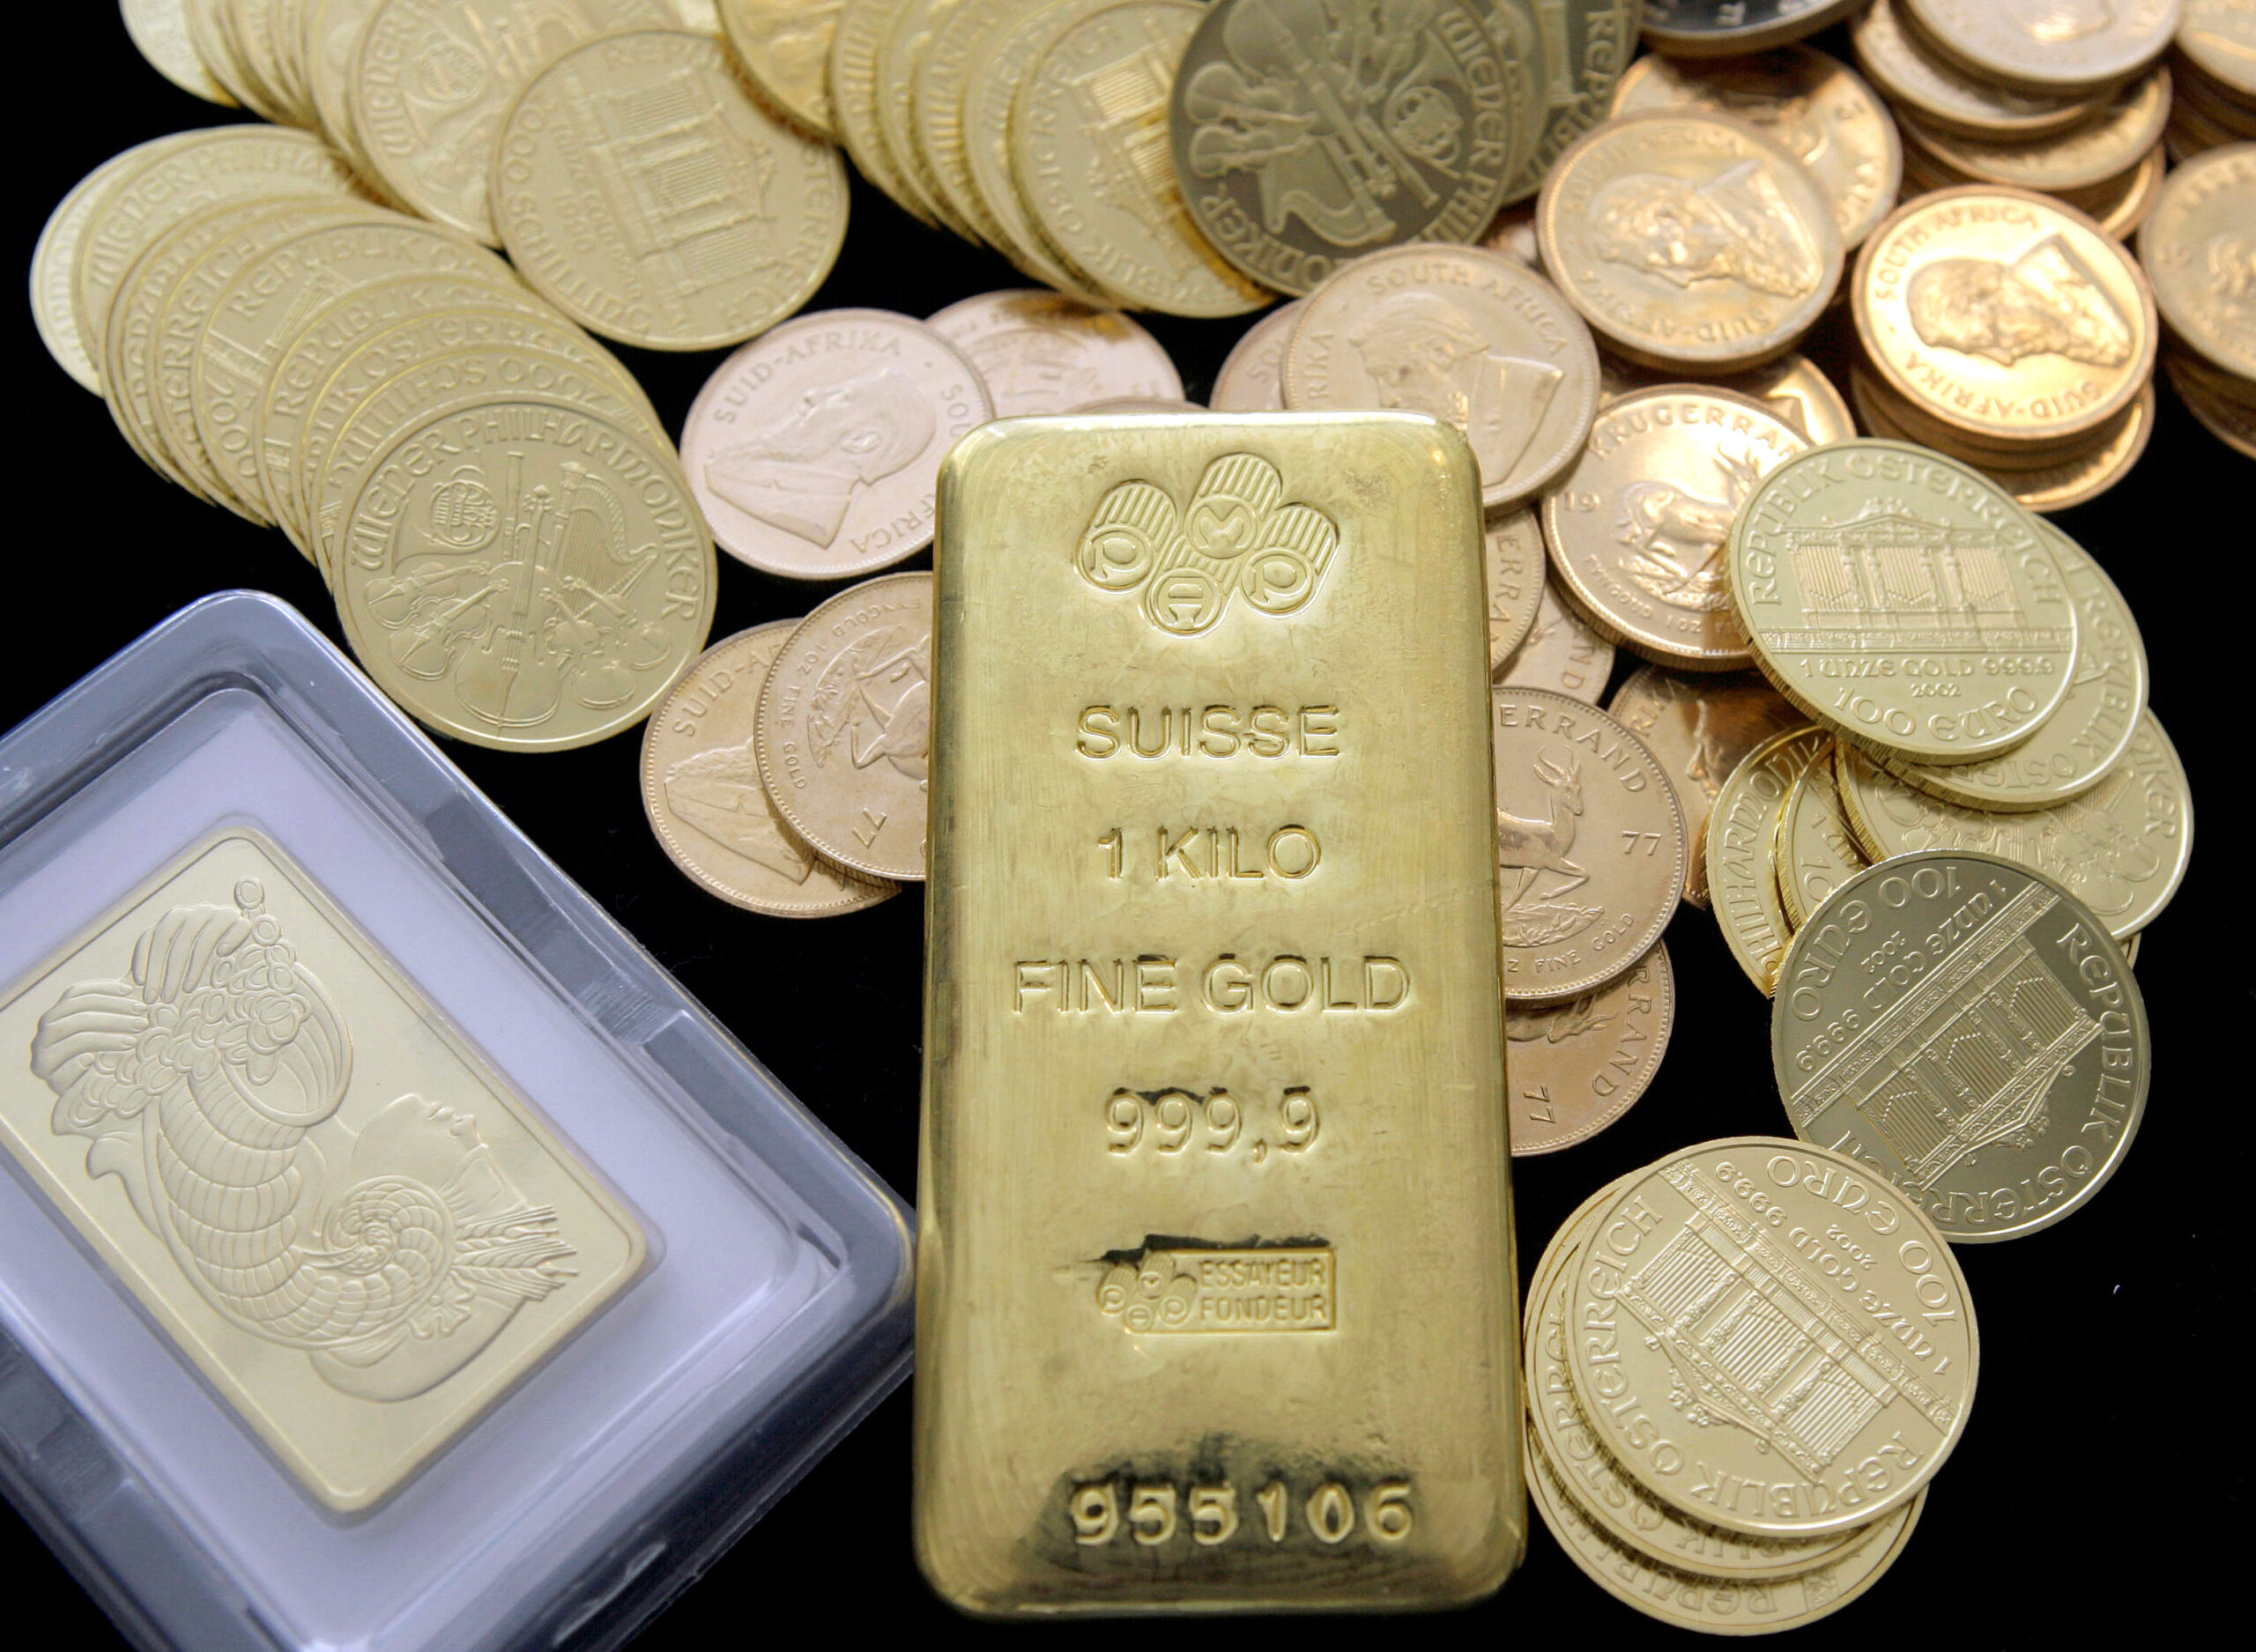 gold coins and bars are shown at California Numismatic Investments in Inglewood, Calif